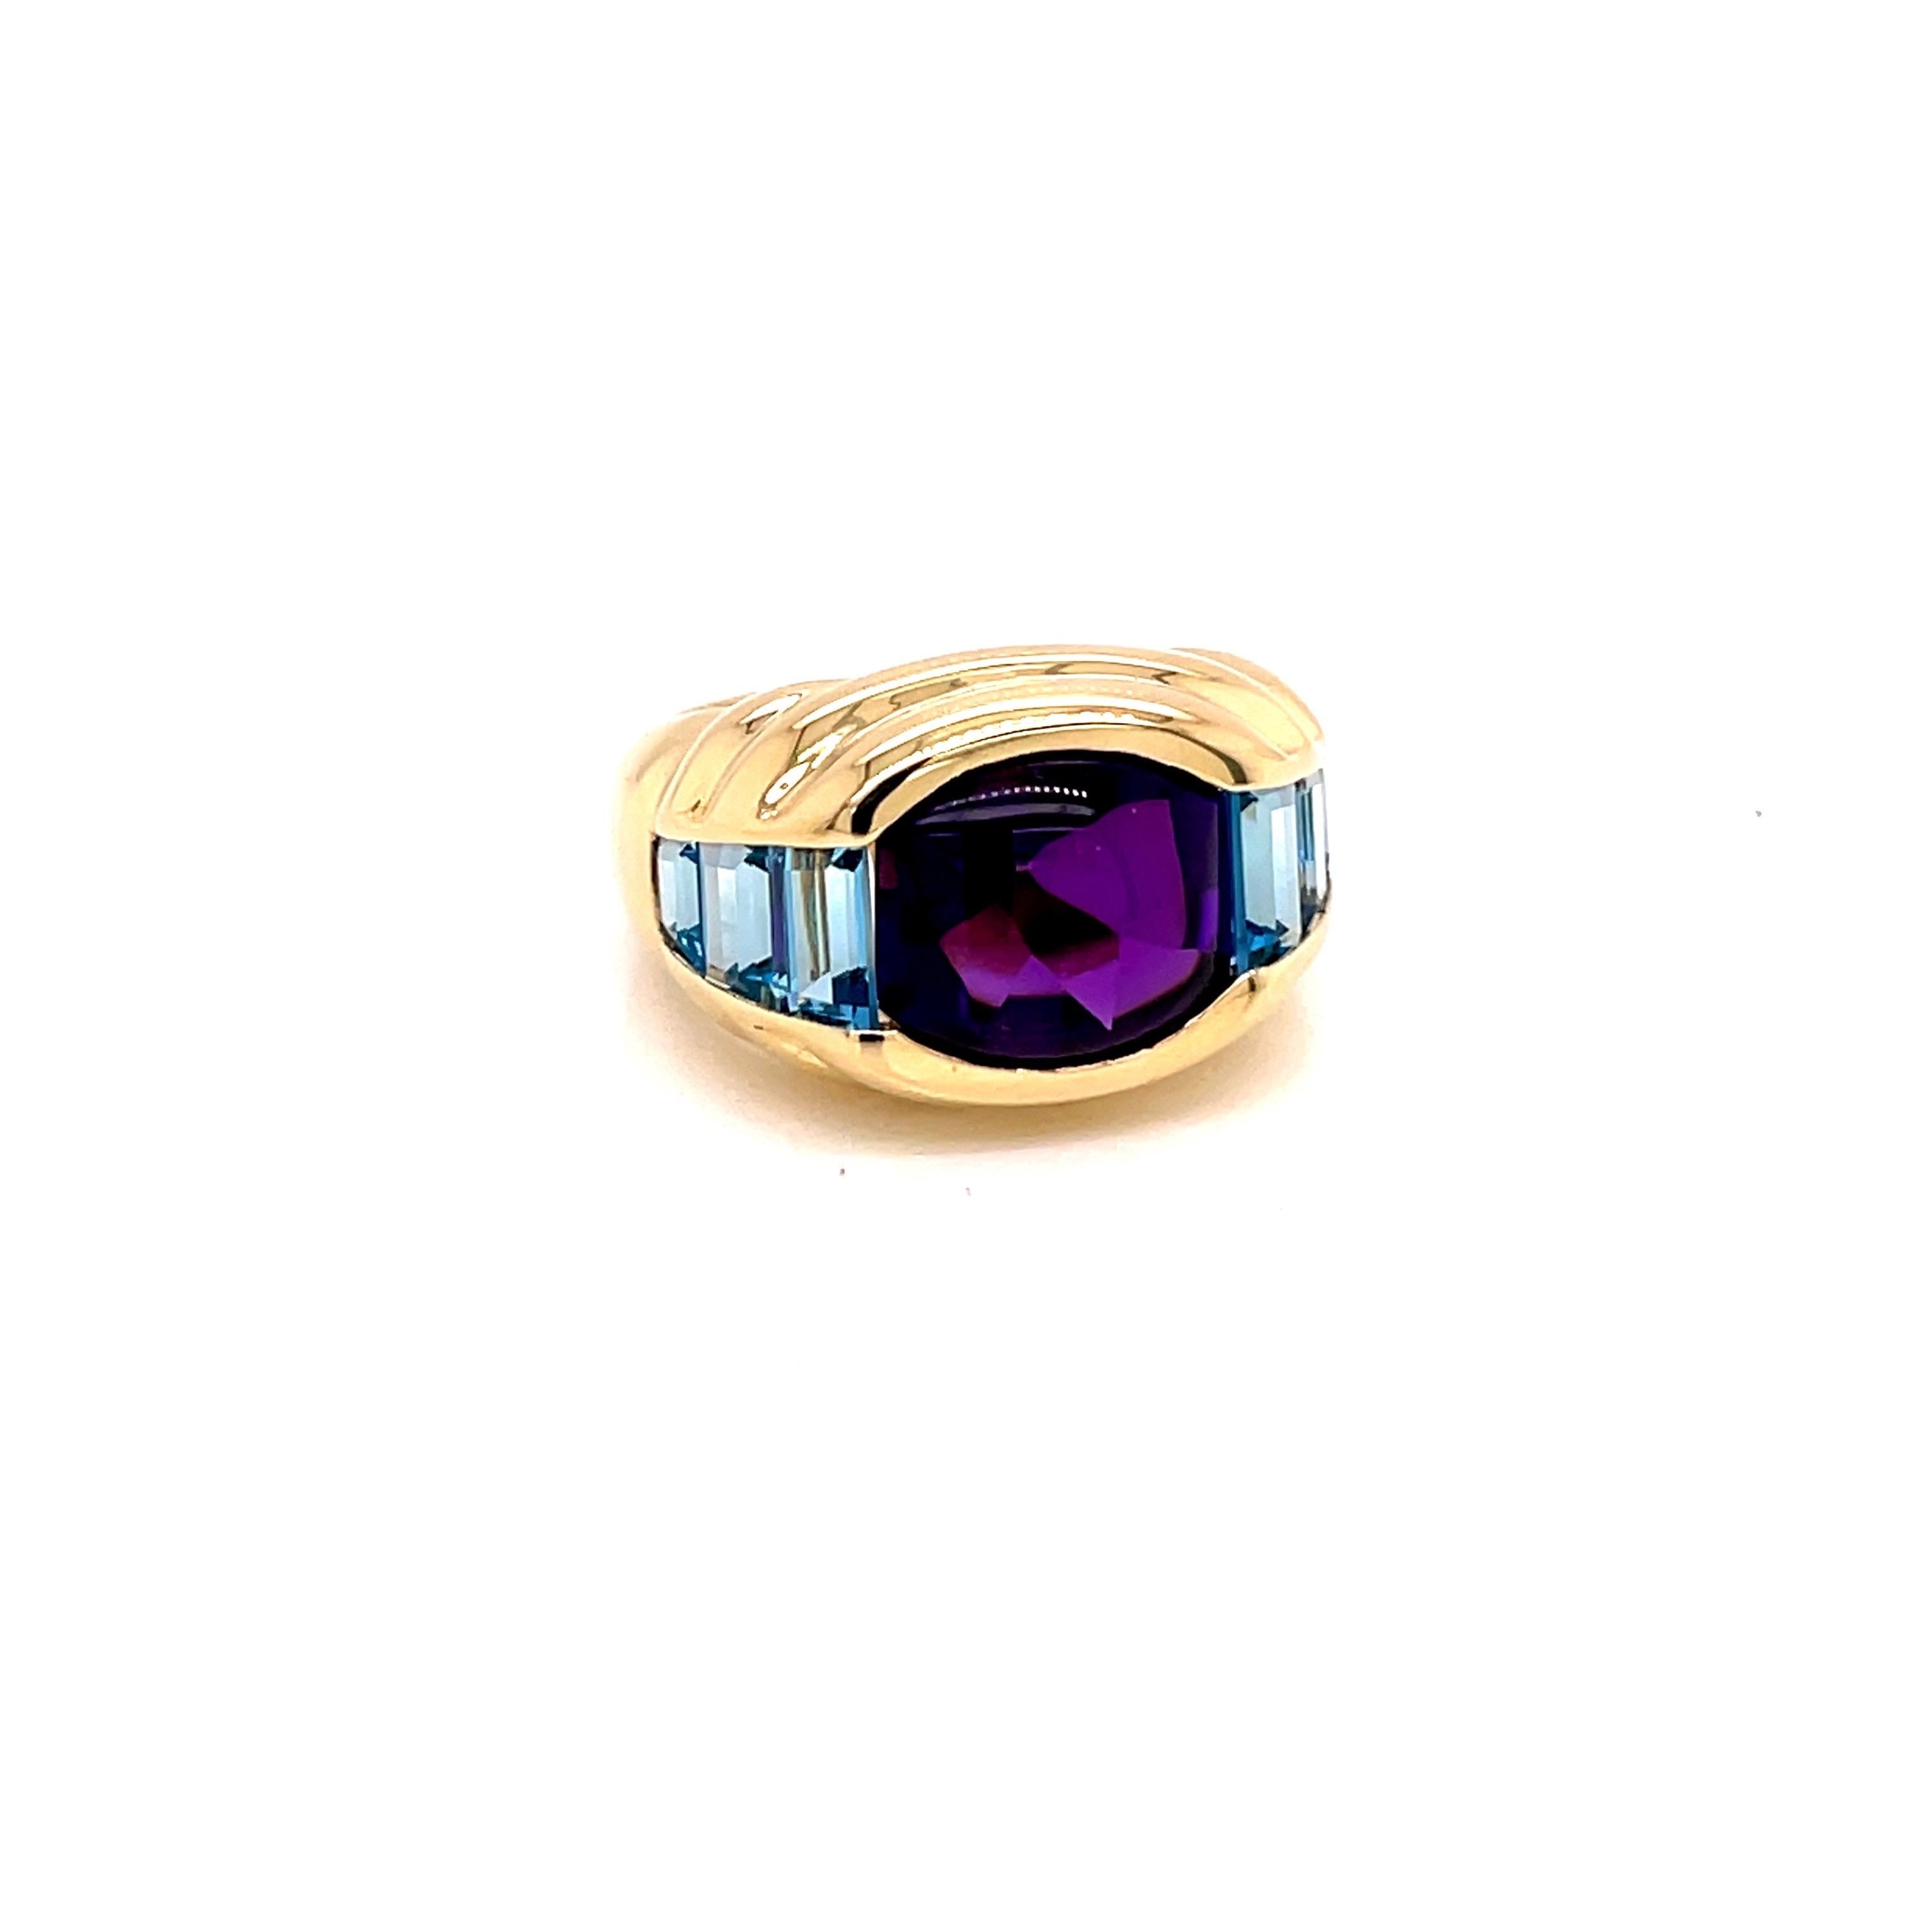 Vintage 1980's 3.50ct  Cabochon Amethyst Ring  - the amethyst weighs approximately 3.50ct and measures 10.5 x 9.5mm.  It is accented with 6 trapezoid blue topaz stones channel set.  The setting is 14k yellow gold  bezel setting with a finger size